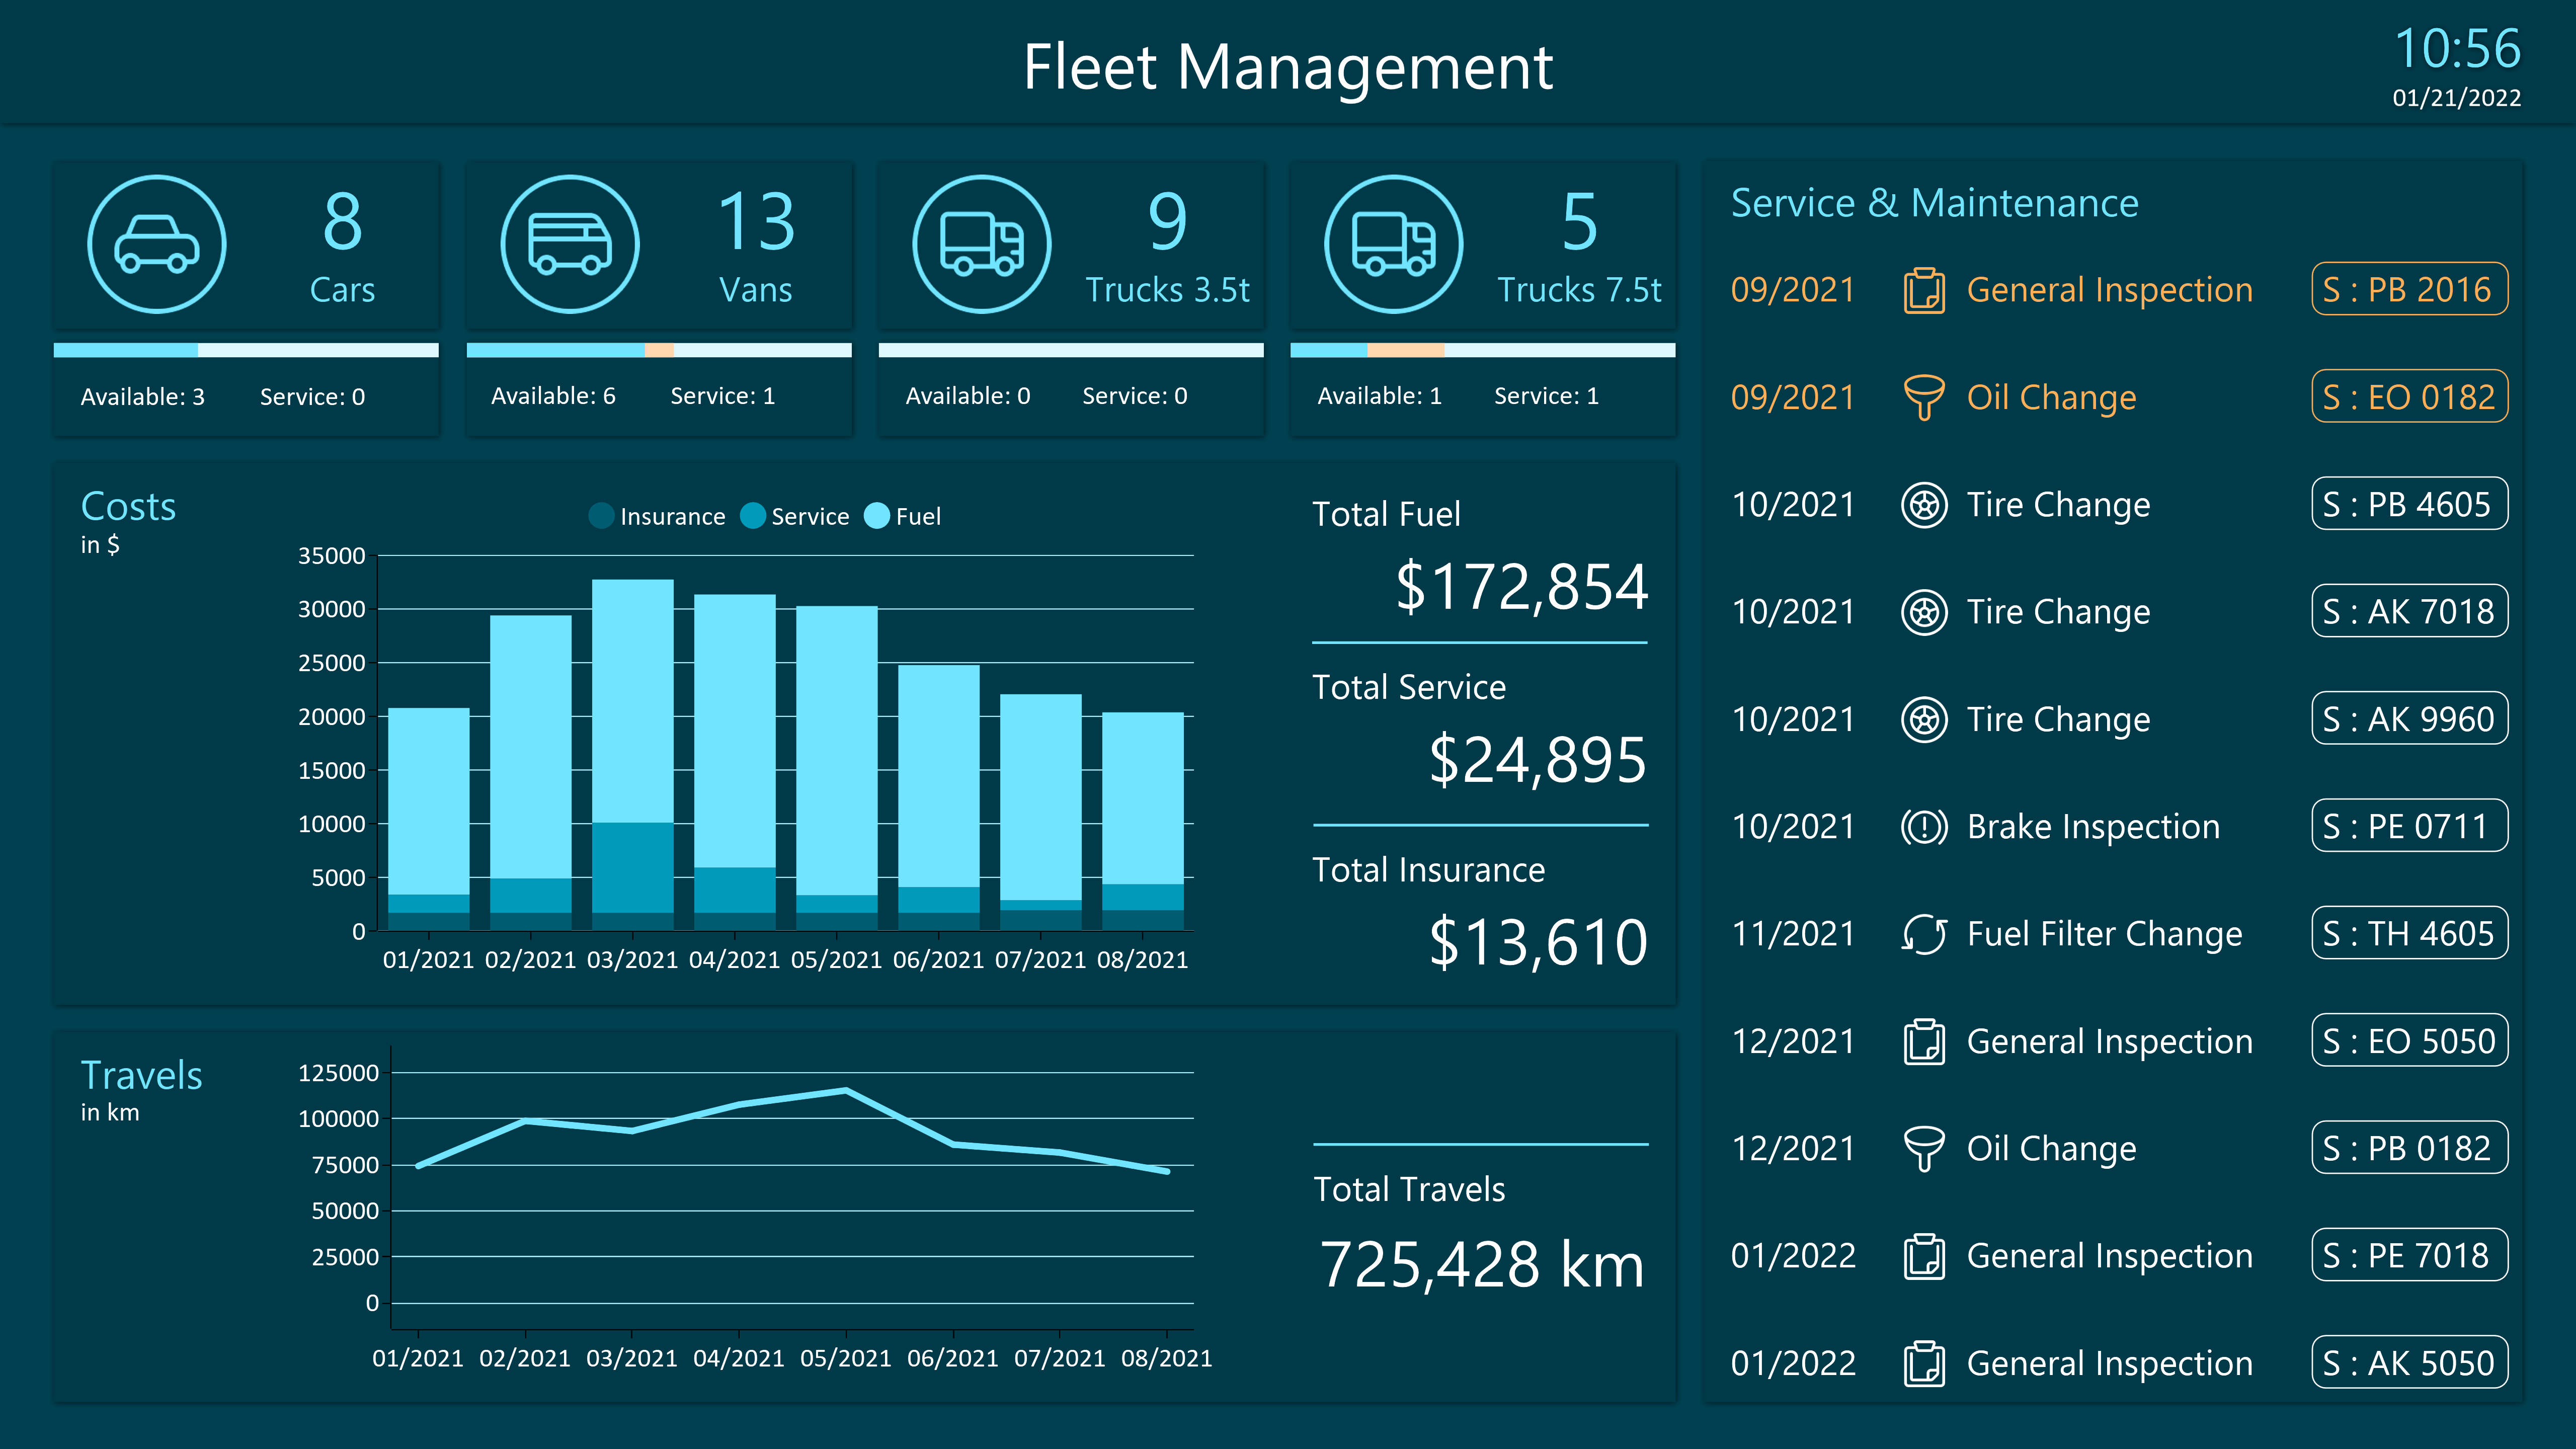 Fleet Management Dashboard For Real Time Information About Your Fleet